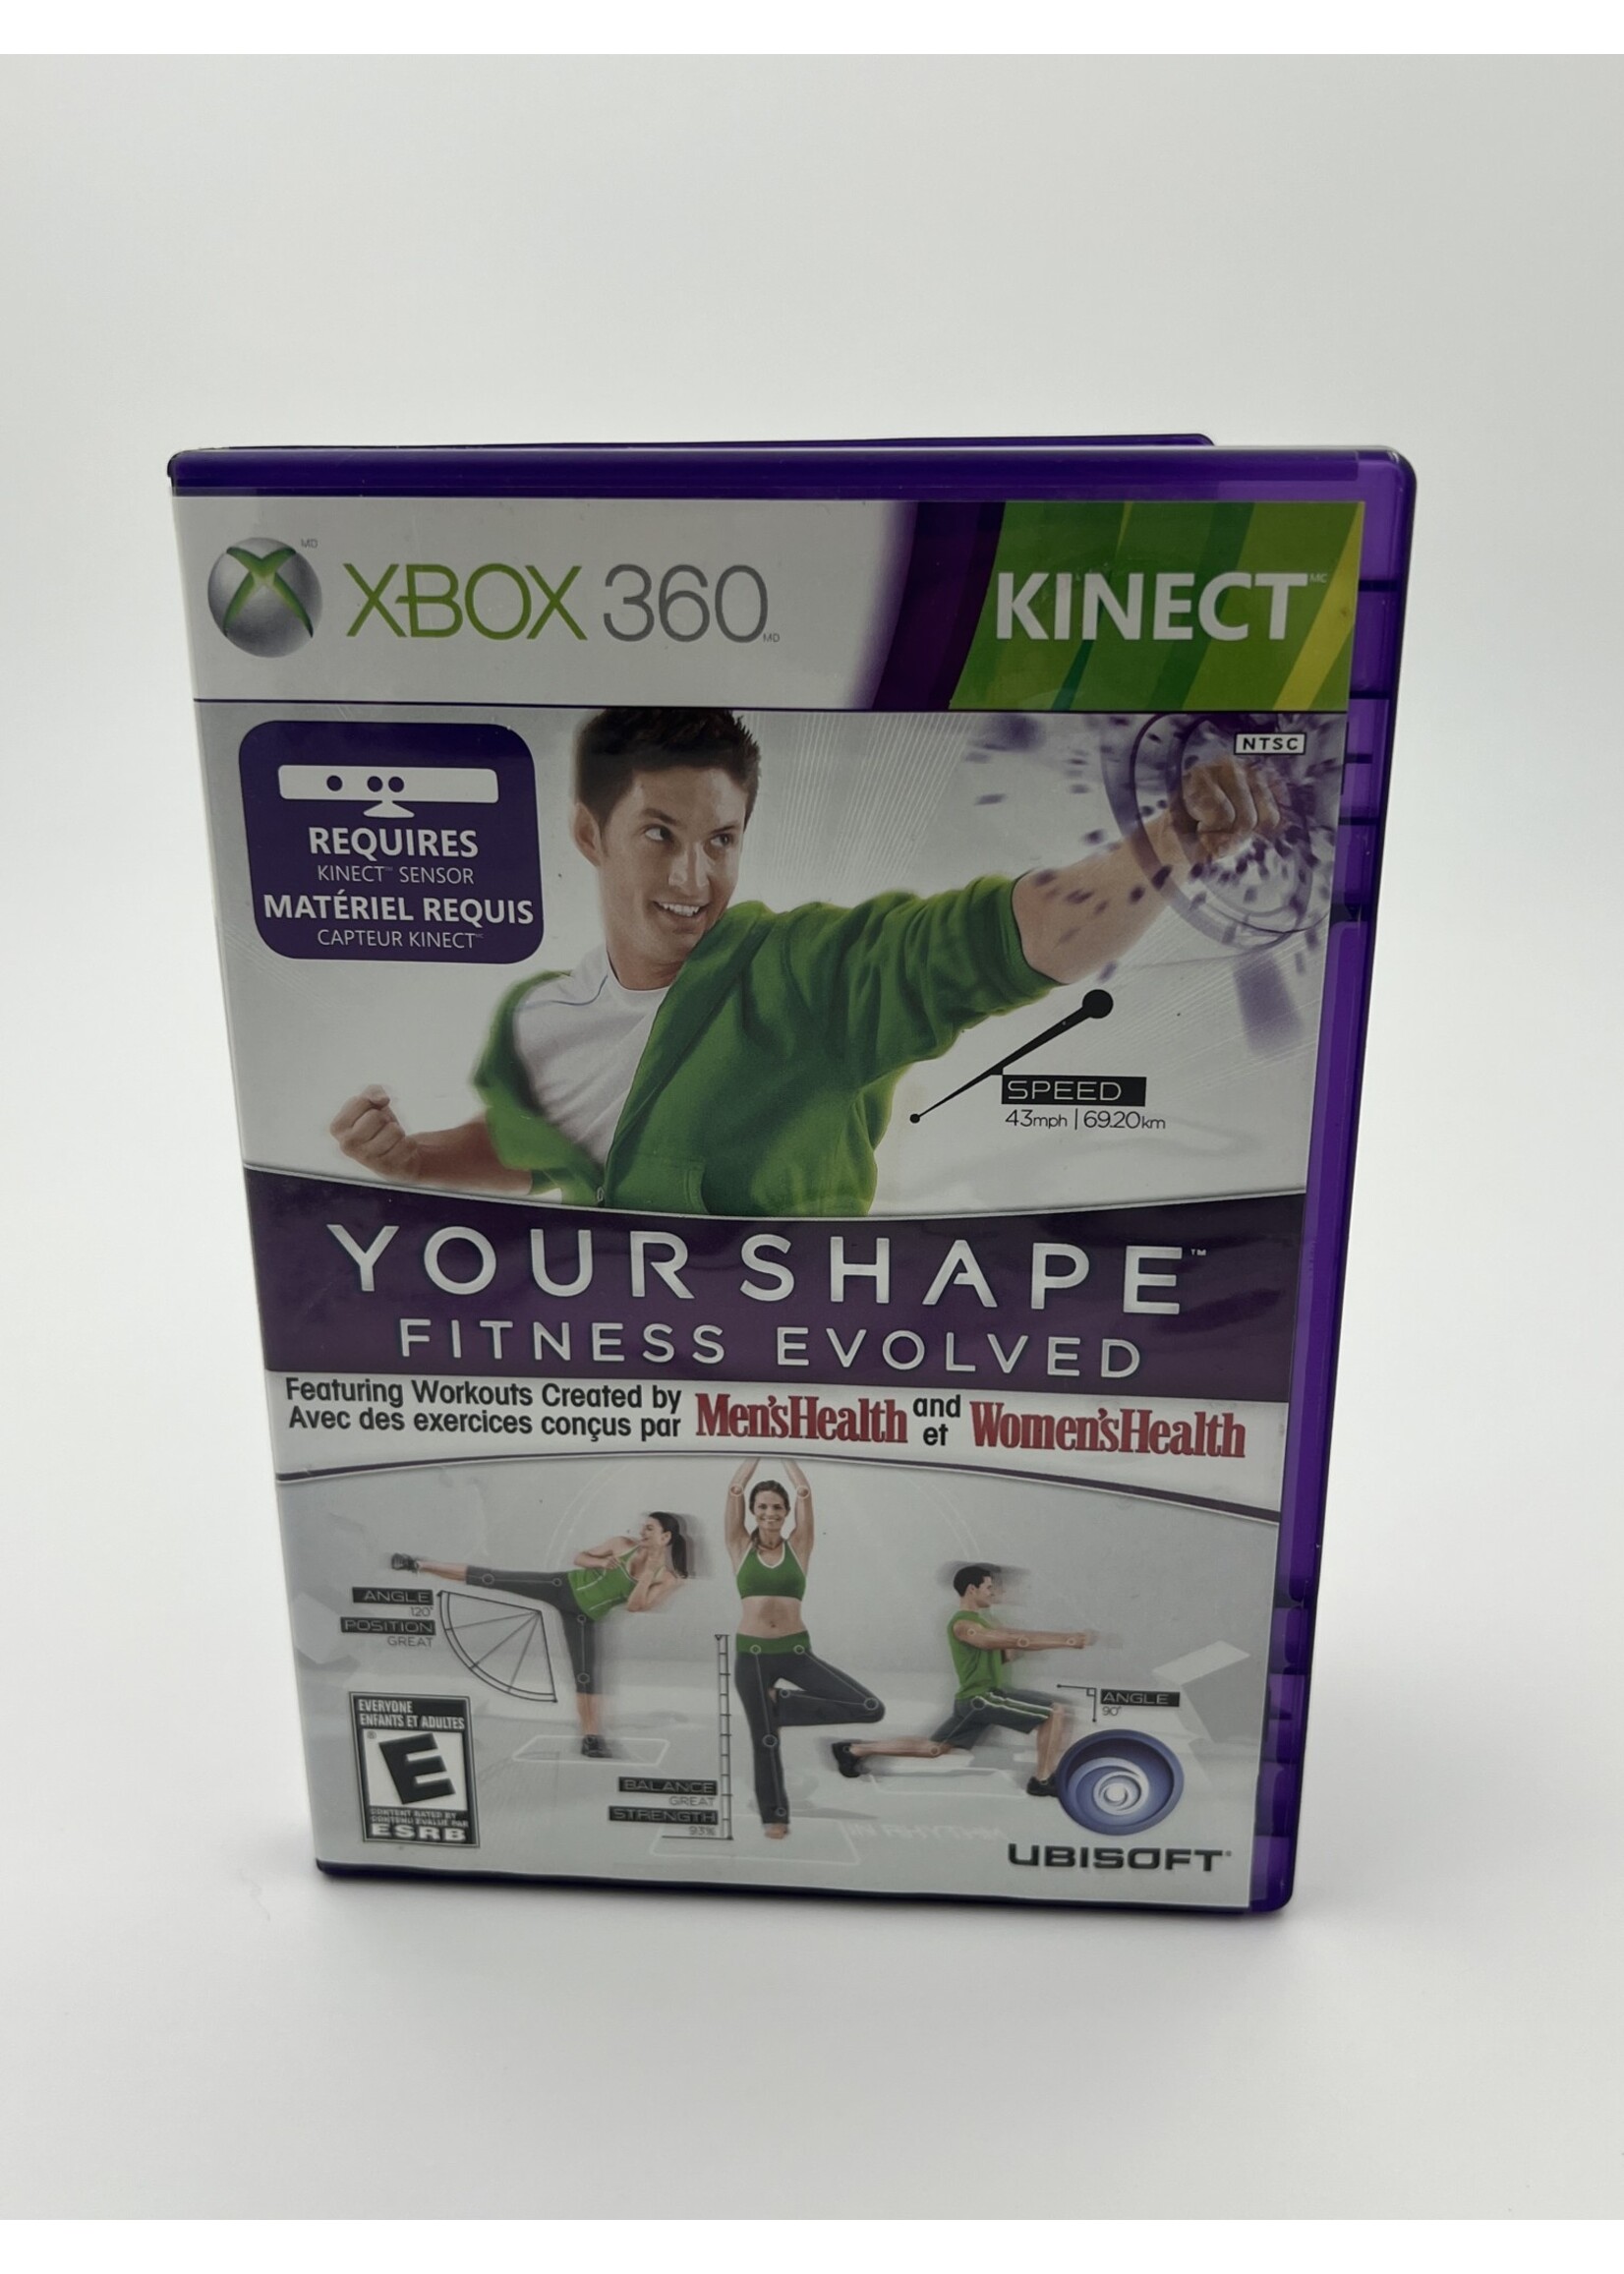 Your Shape Fitness Evolved 360 ubi soft Microsoft Xbox 360 From Japan  4988648770447 